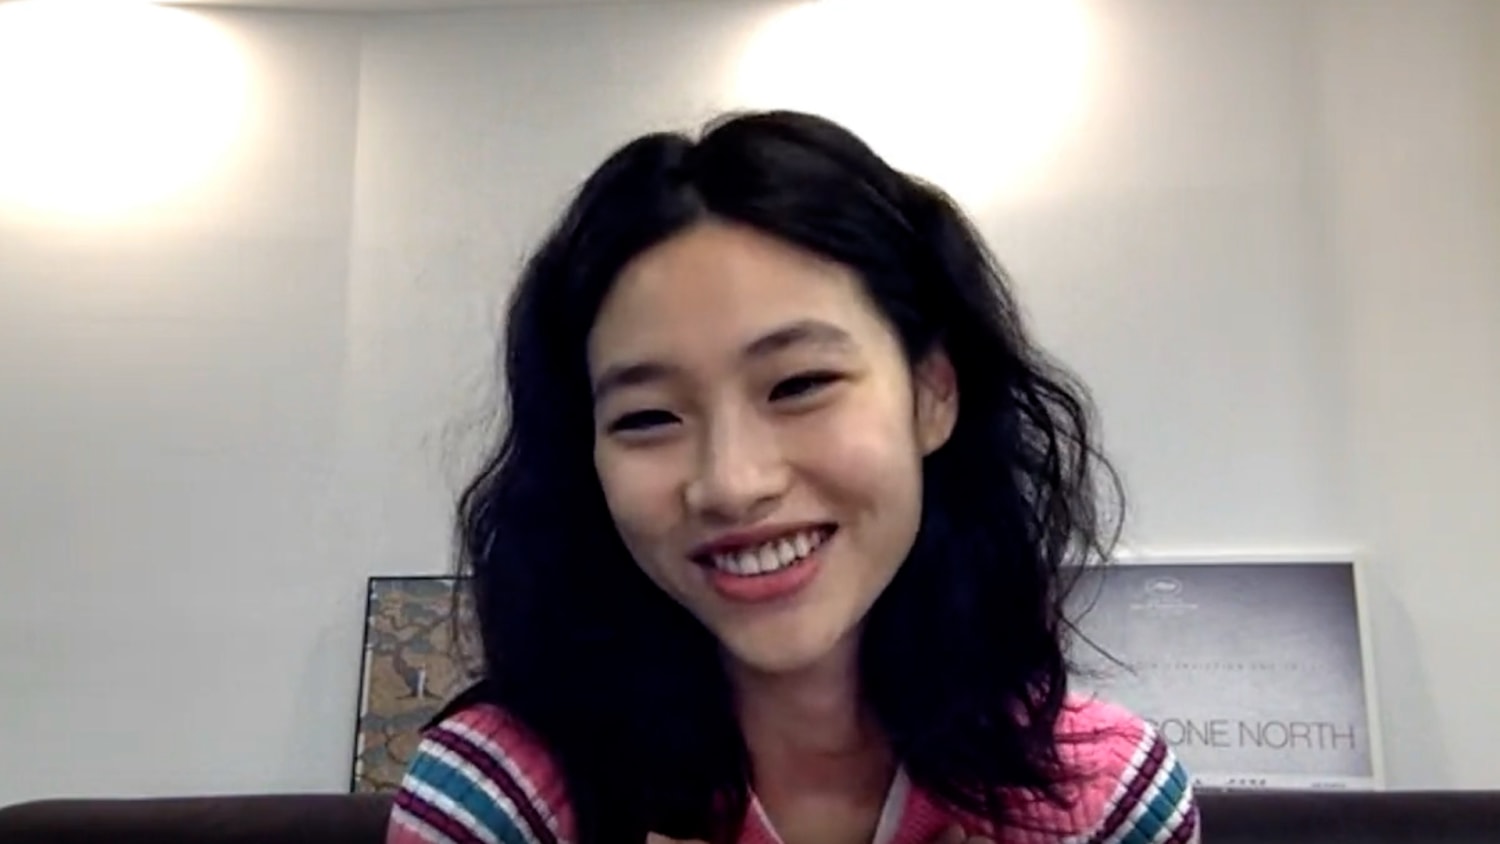 HoYeon Jung From Netflix's Squid Game Rocks a Hair Ribbon at the